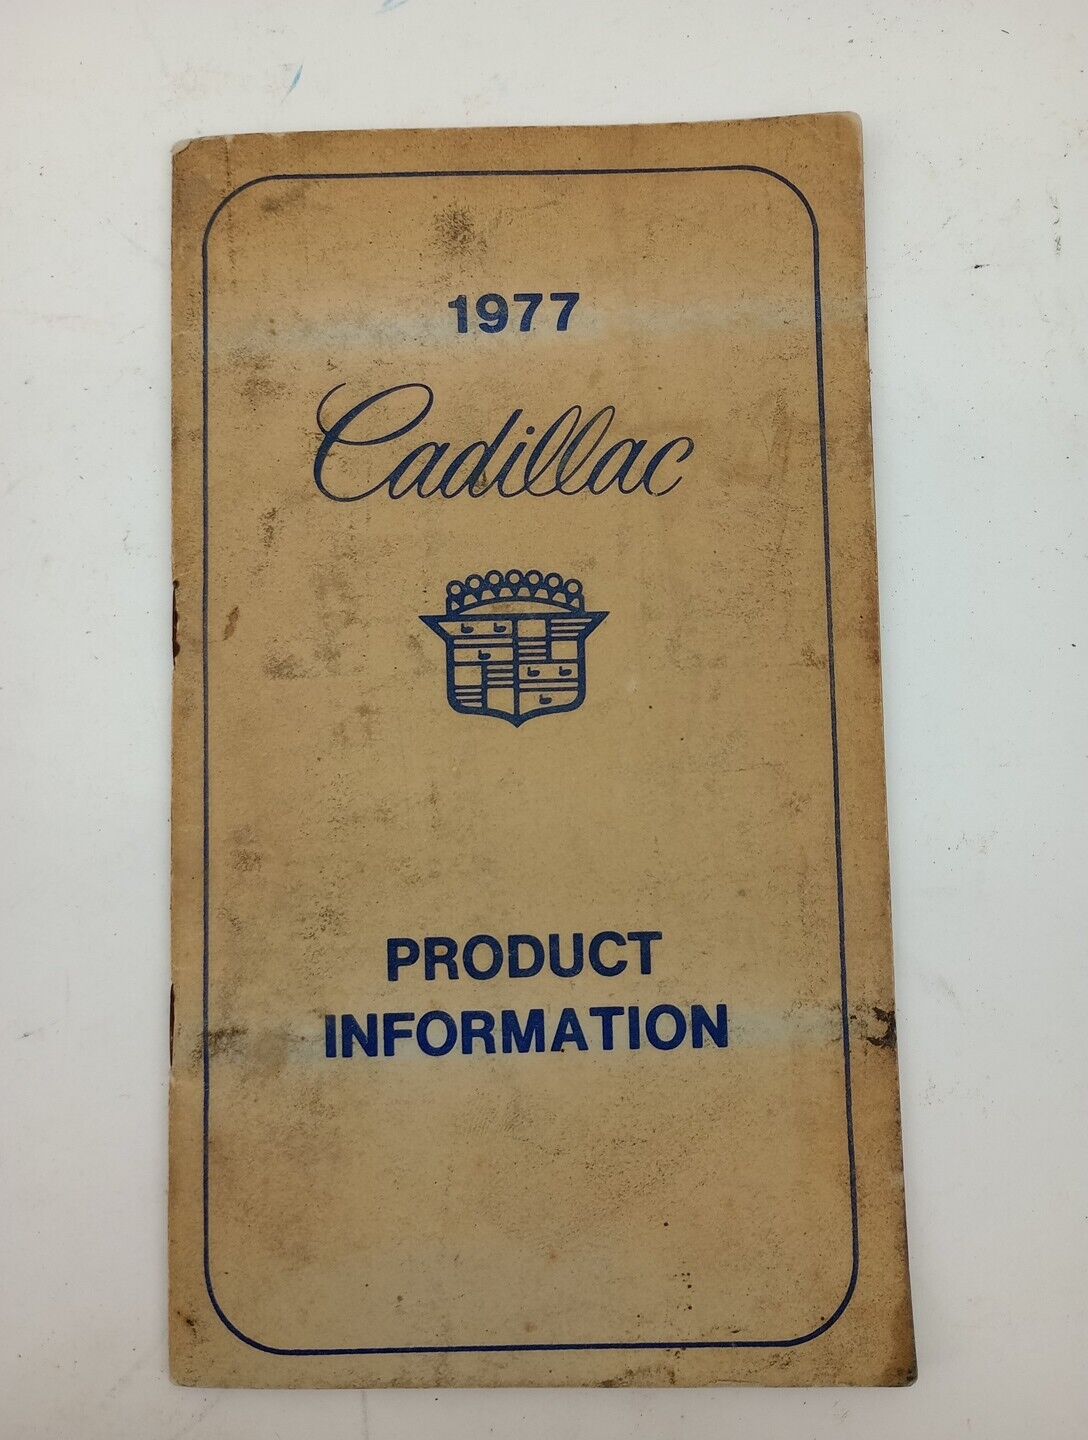 Vintage 1977  Cadillac Product Information booklet. Super Cool 😎